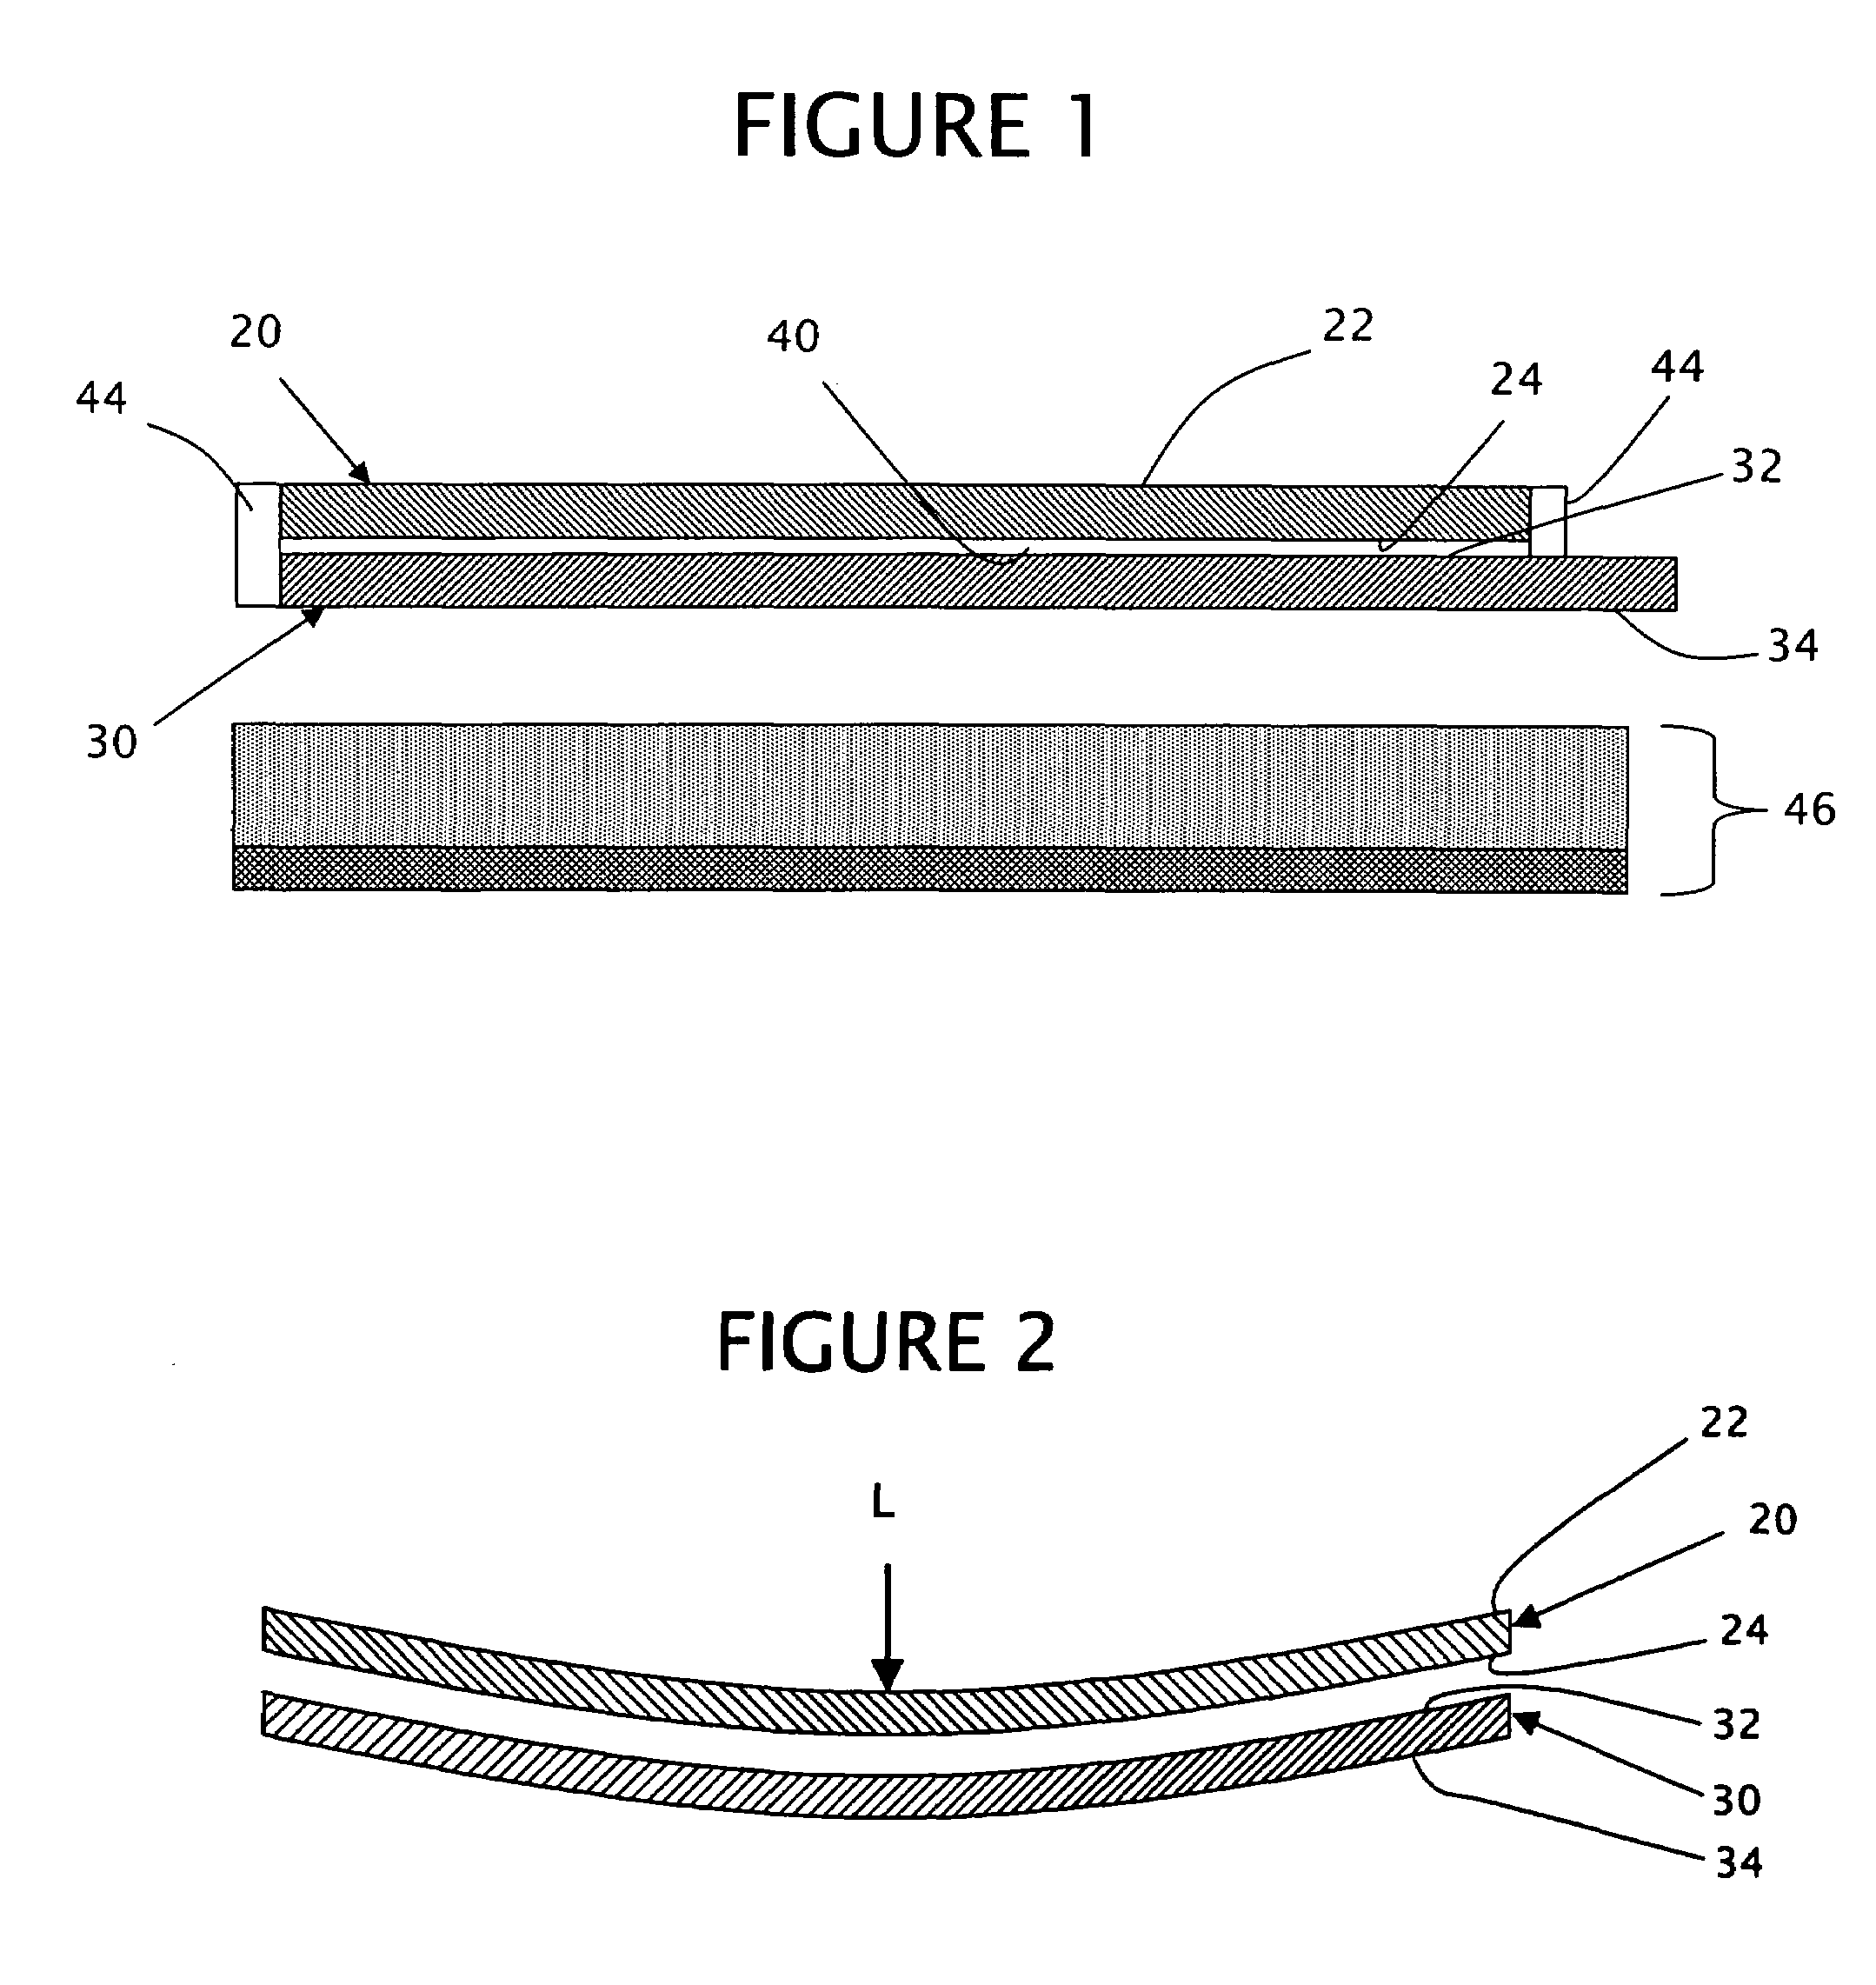 Glass laminate substrate having enhanced impact and static loading resistance